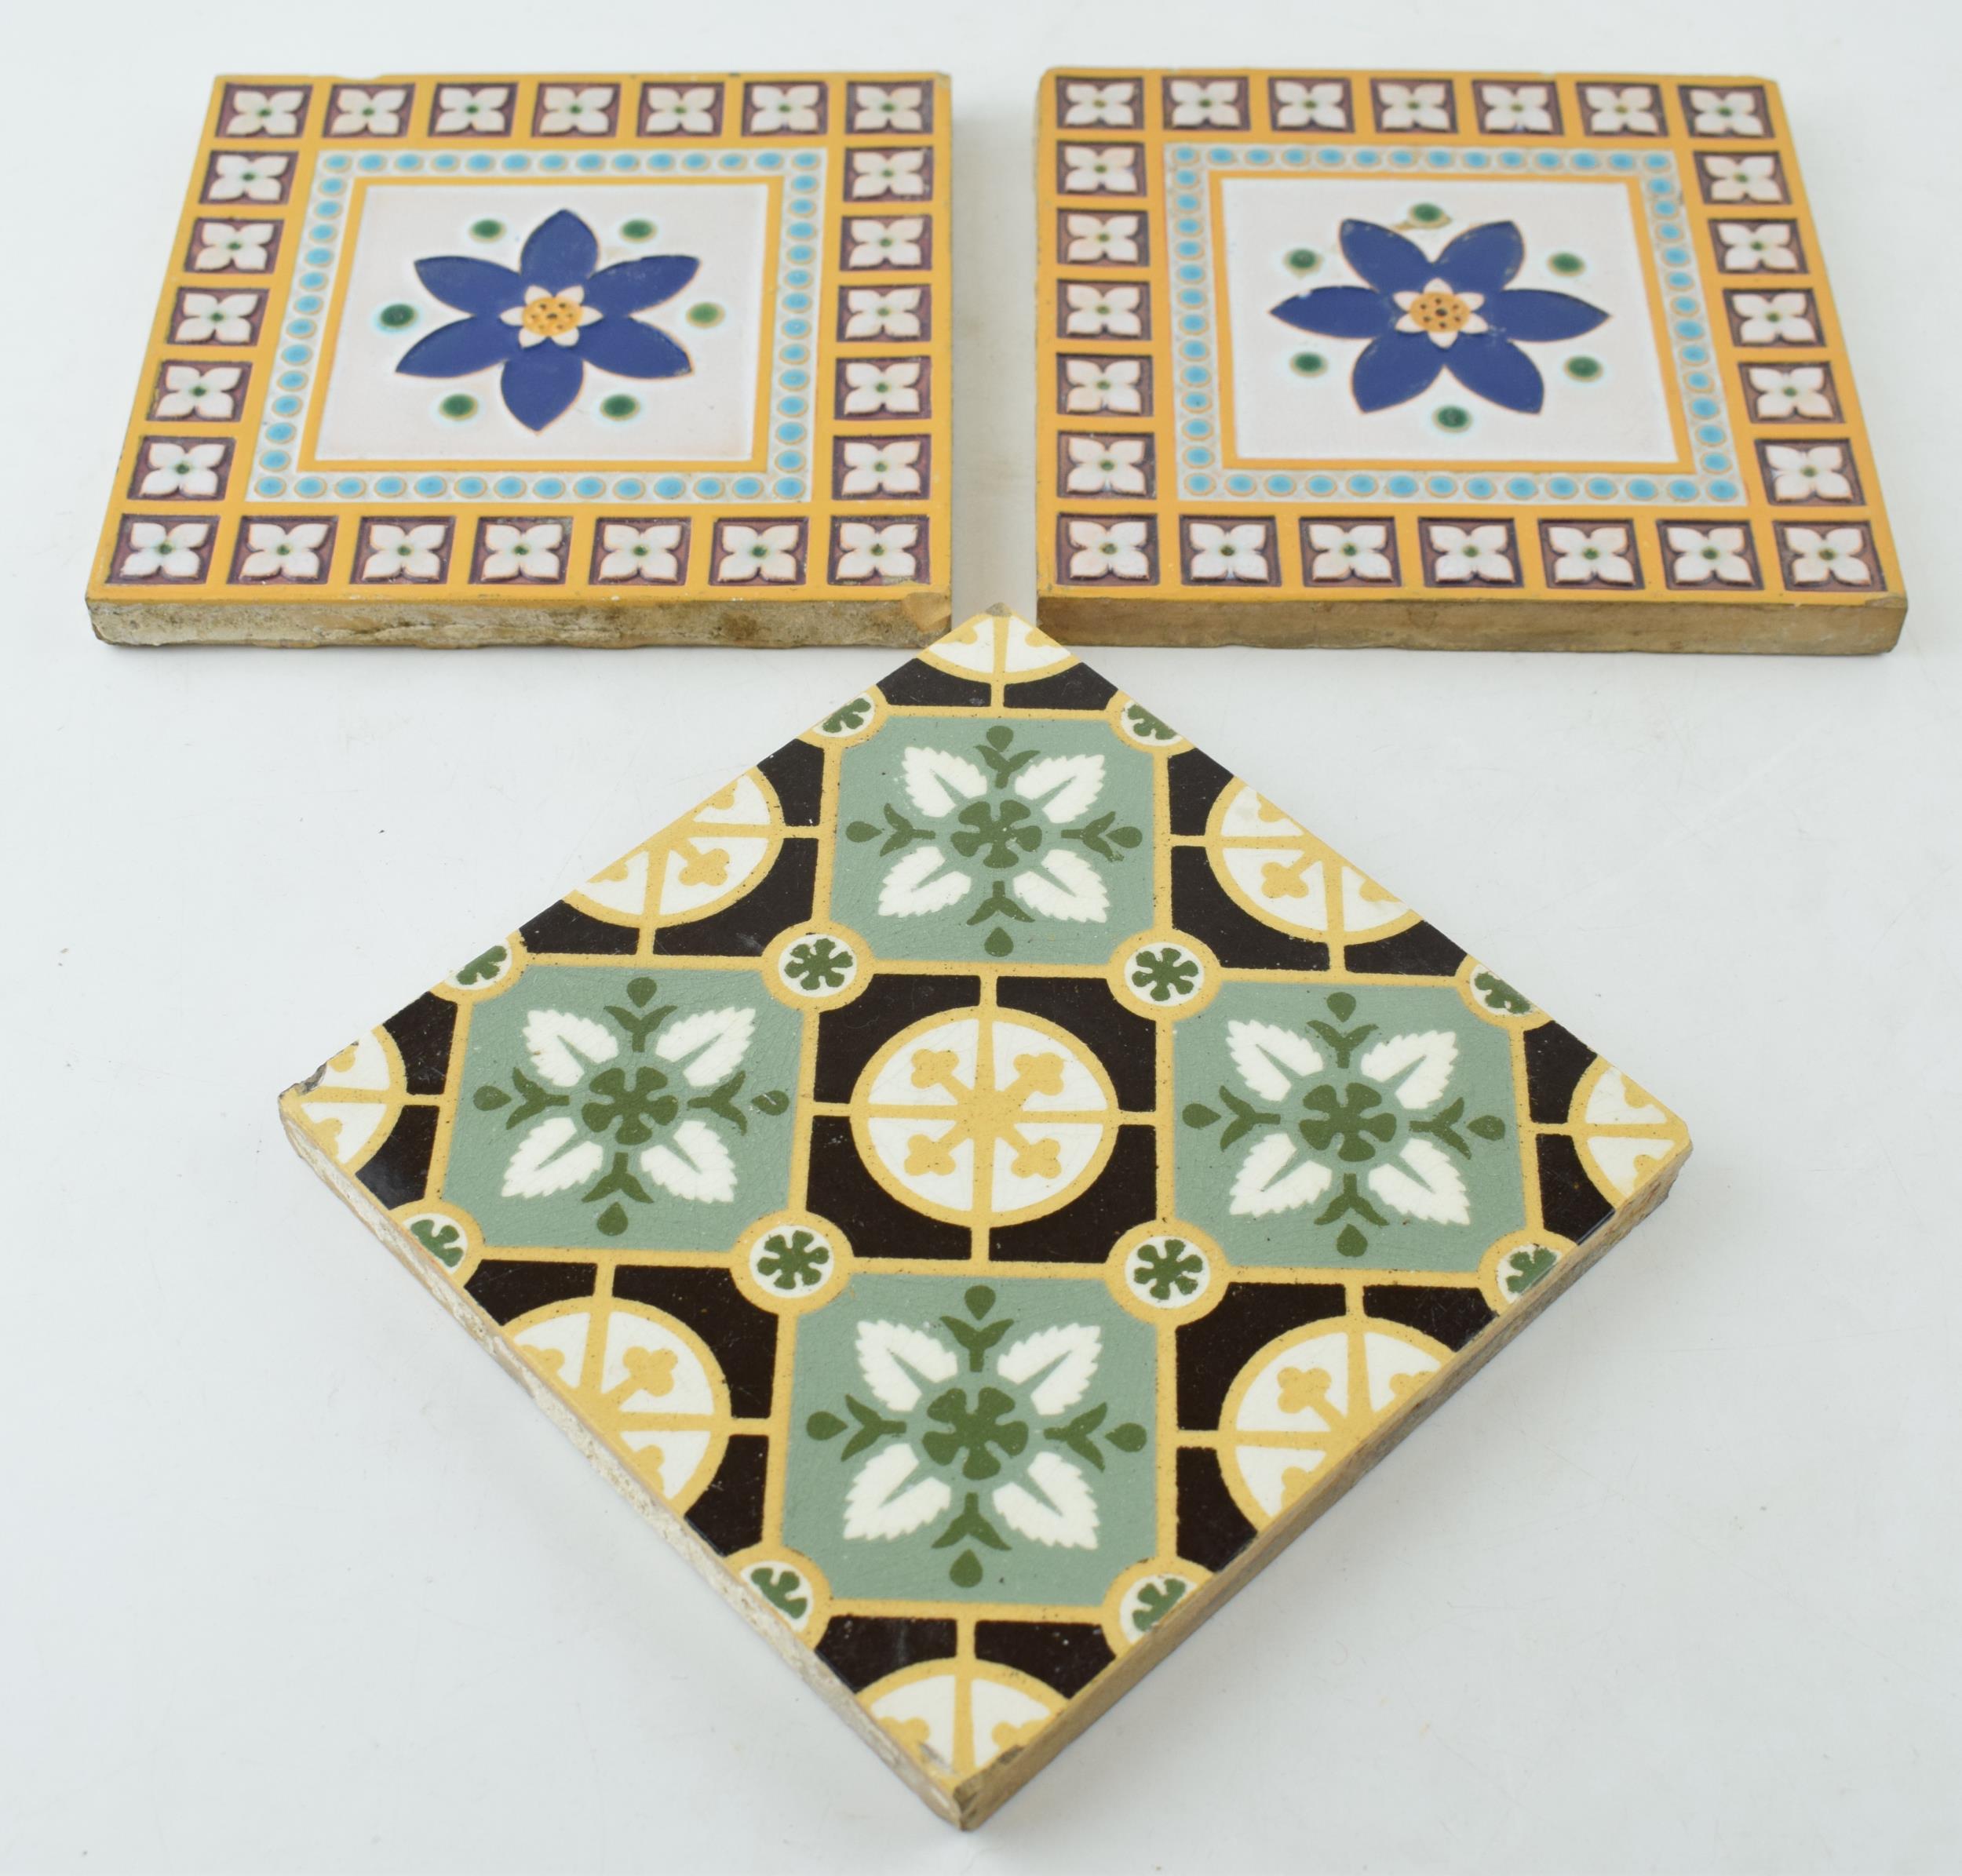 Two 6" Minton & Co, Stoke on Trent glazed tiles with central blue floral design and repeated boarder